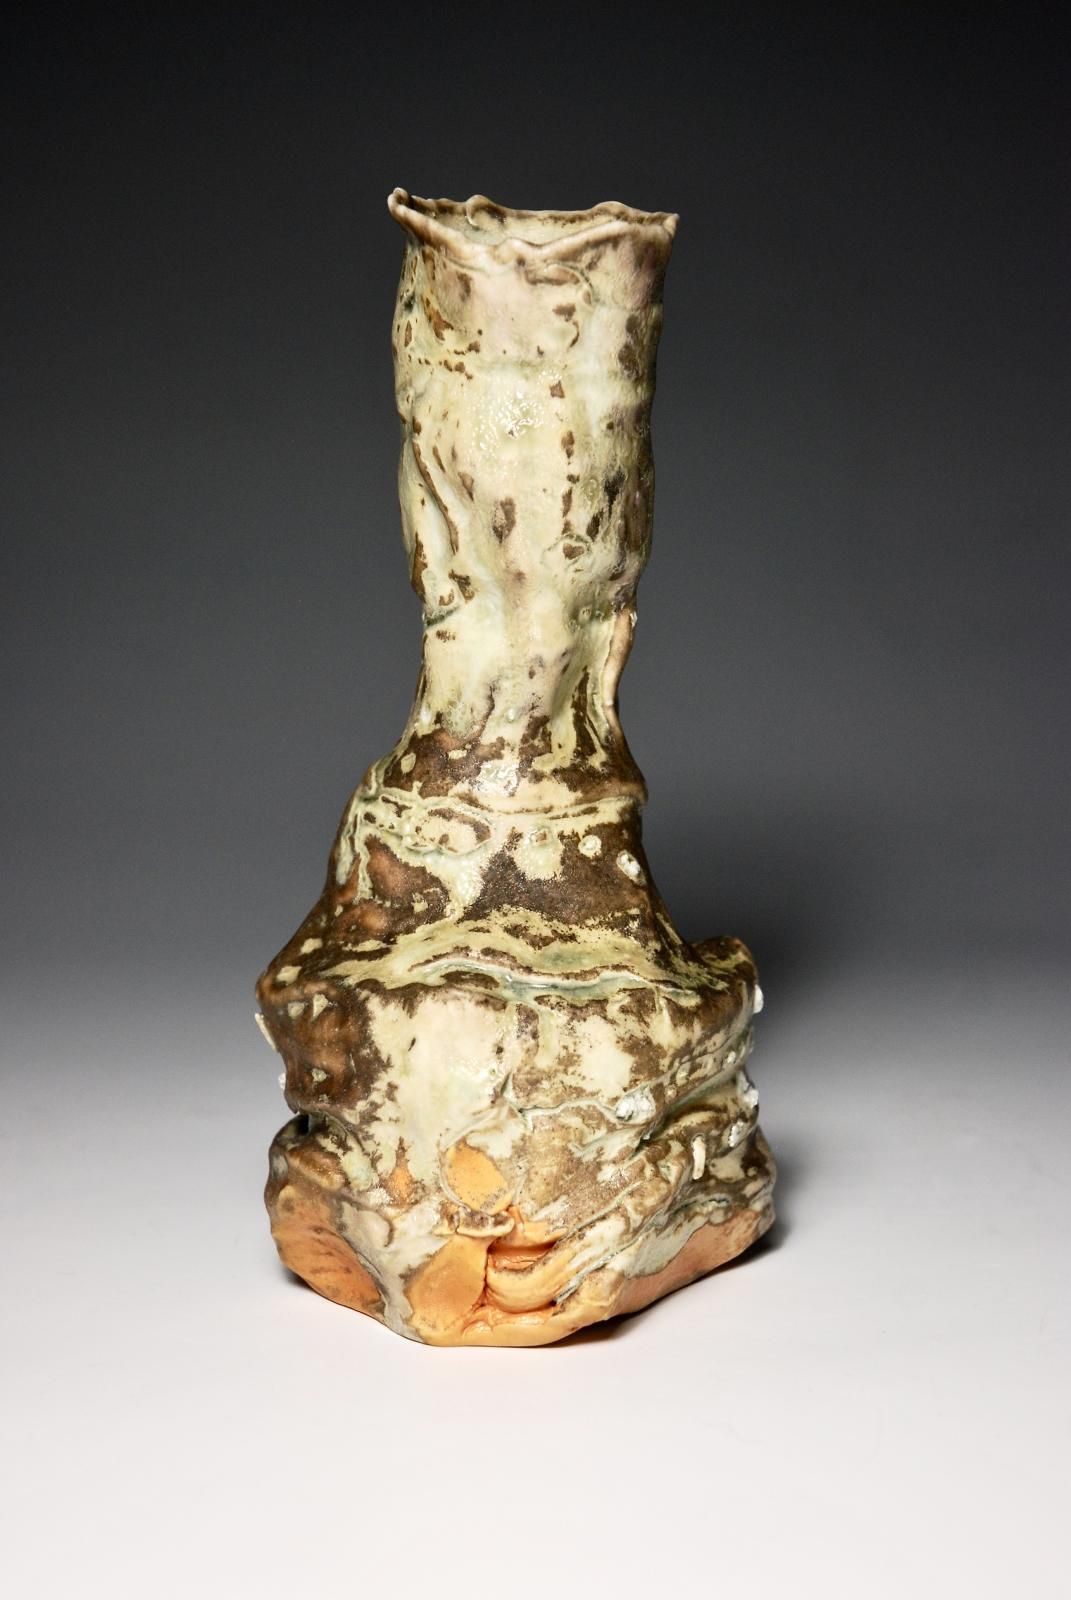 Pourer.  Individual Slow thrown in two parts and hand assembled and manipulated with a trimmed foot.  Porcelain Body with locally sourced indignous rock grits,  Celadon Glaze with varying ash patternation.  Fired  in an Anagama Kiln. by Sim Taylor